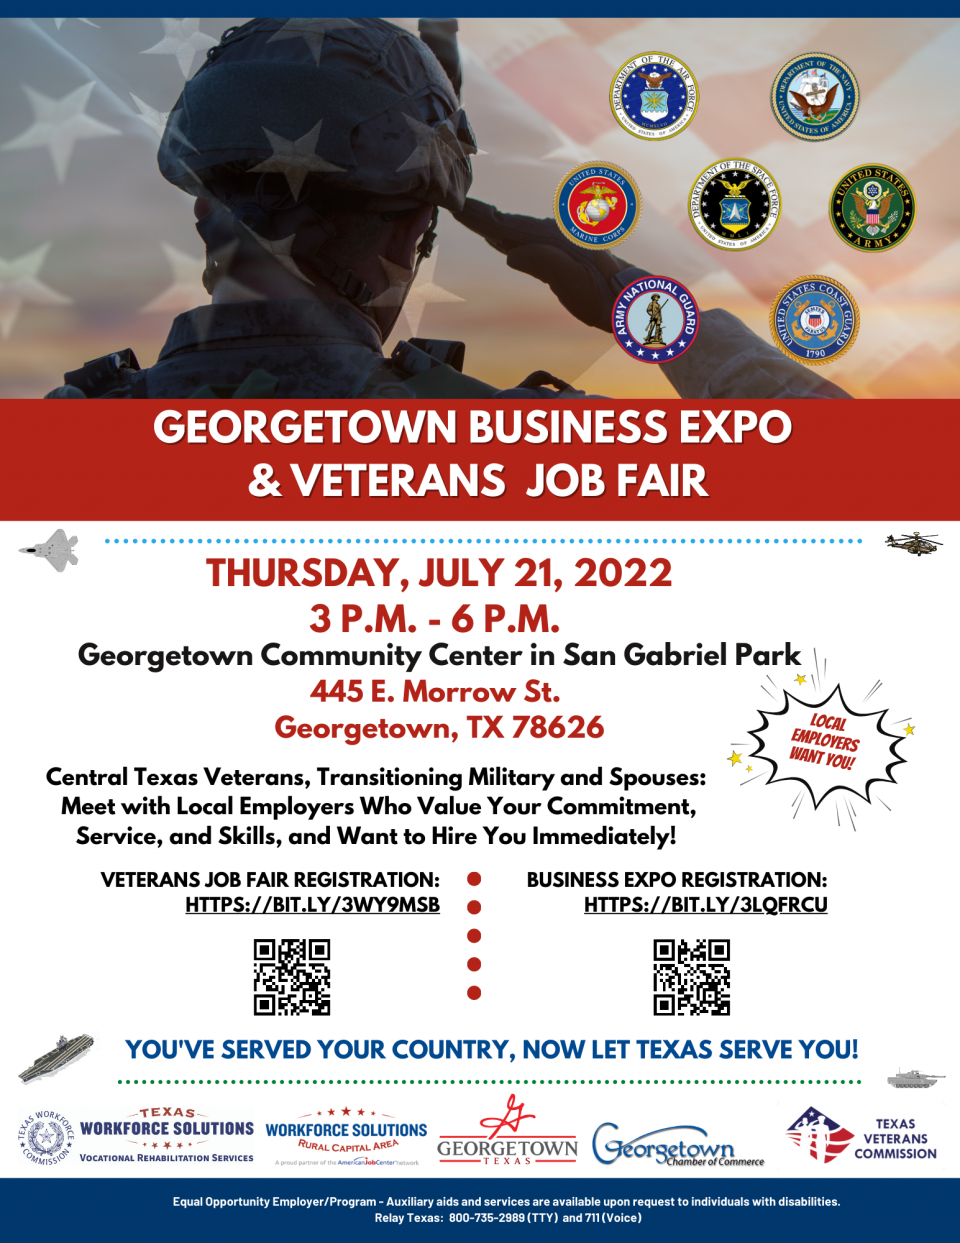 Local Employers Want You! Don't Miss the Georgetown Business Expo & Veterans Job Fair on July 21